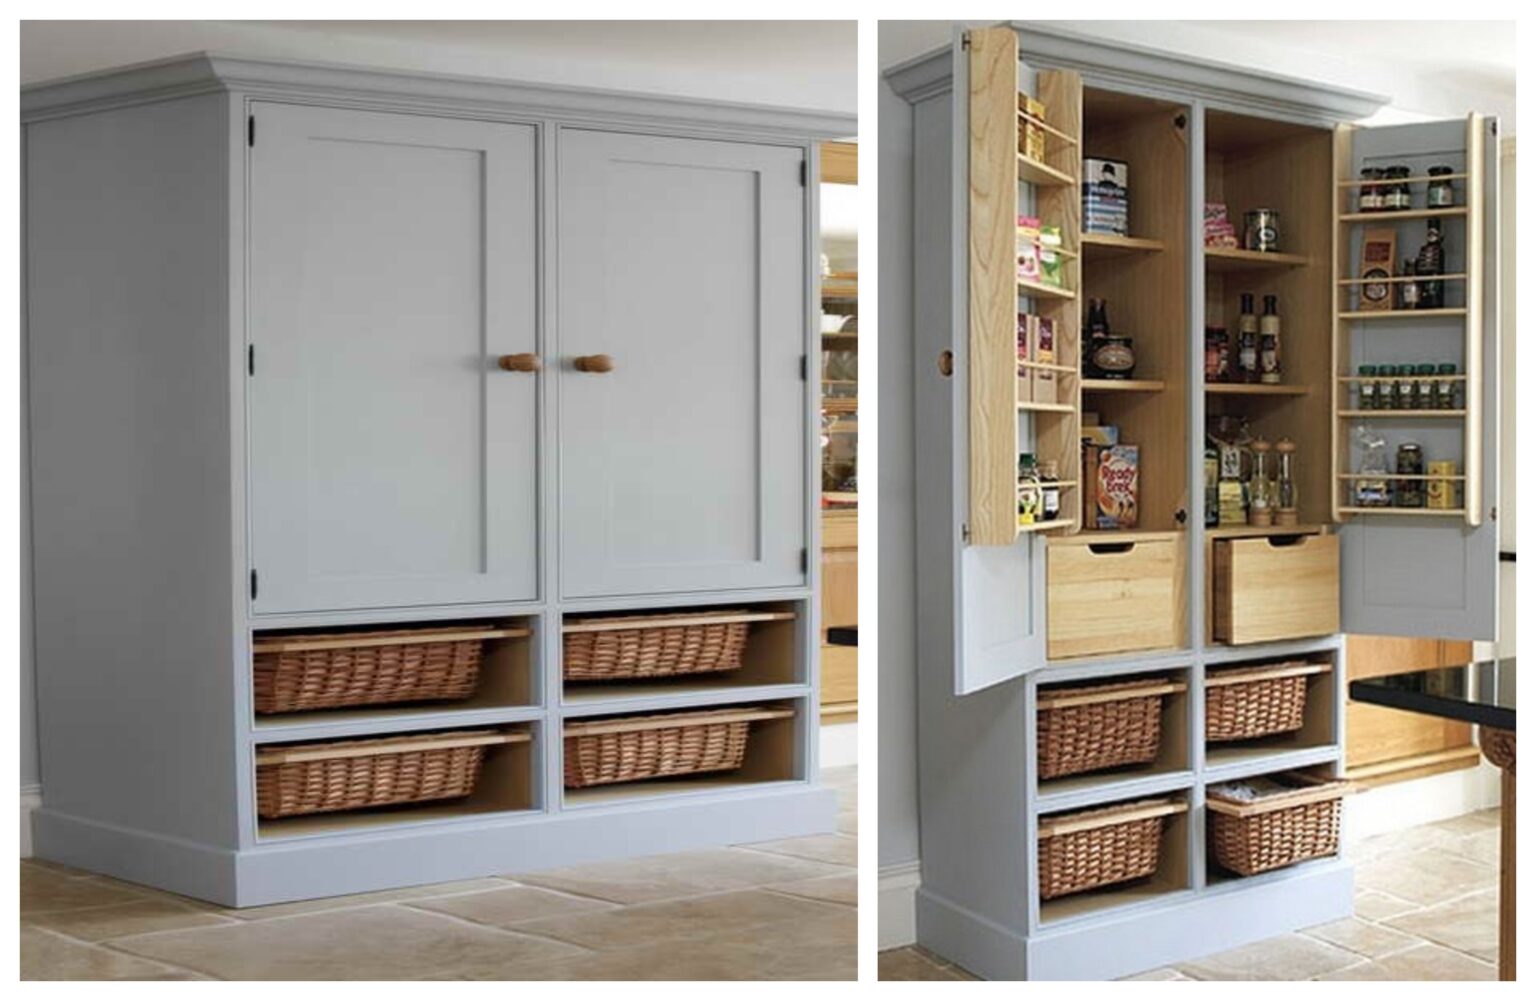 Creative Pantry Cabinet Ideas - The Owner-Builder Network